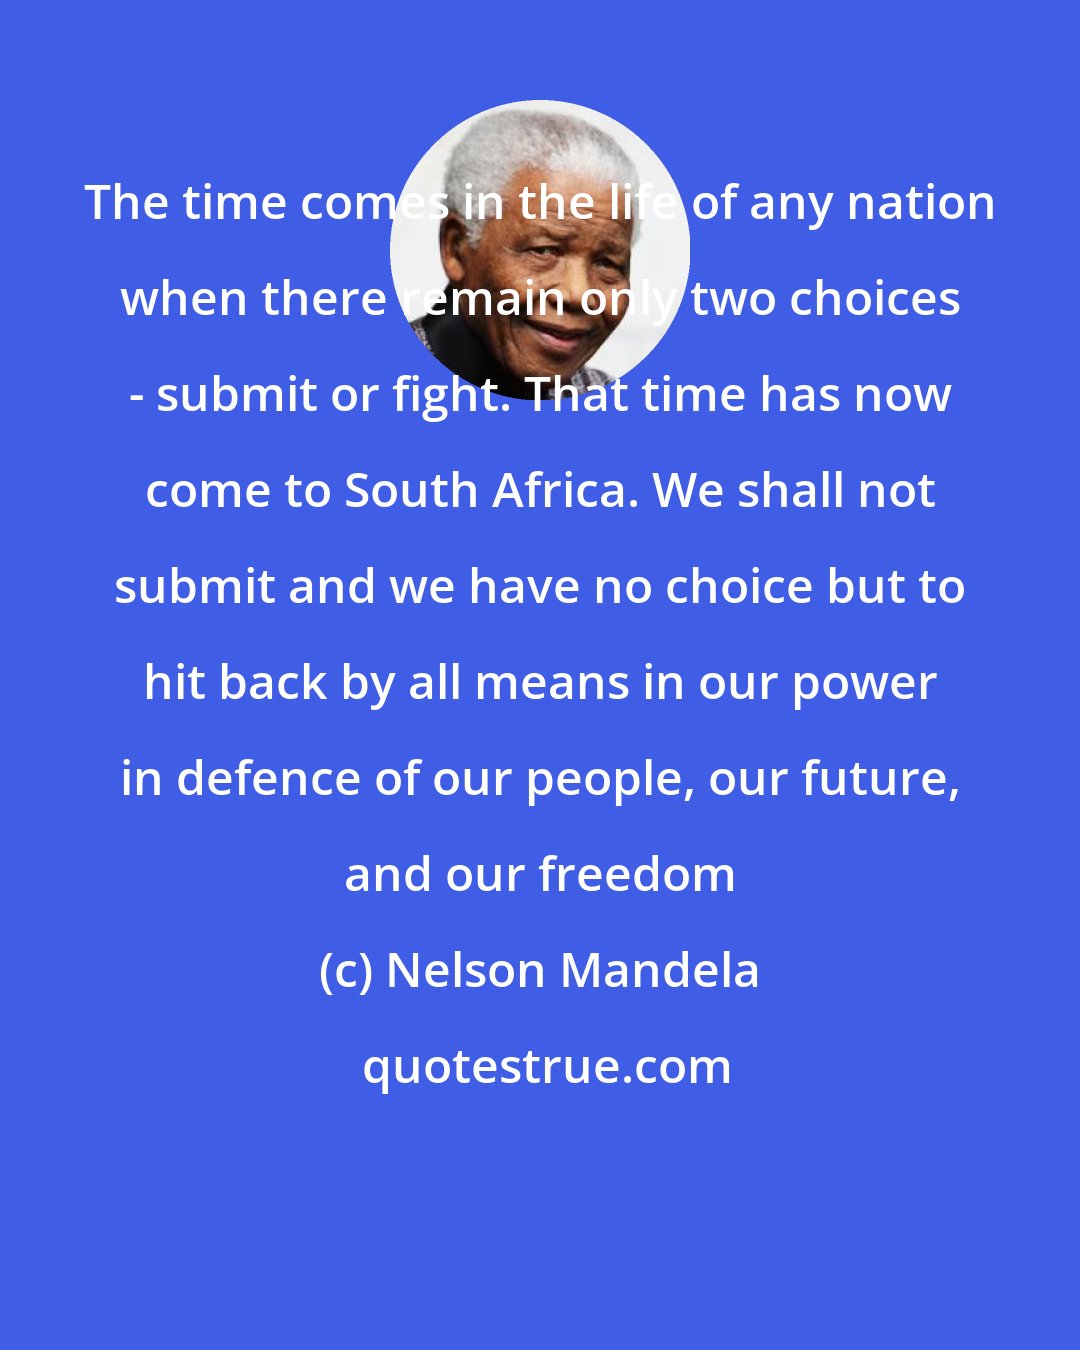 Nelson Mandela: The time comes in the life of any nation when there remain only two choices - submit or fight. That time has now come to South Africa. We shall not submit and we have no choice but to hit back by all means in our power in defence of our people, our future, and our freedom